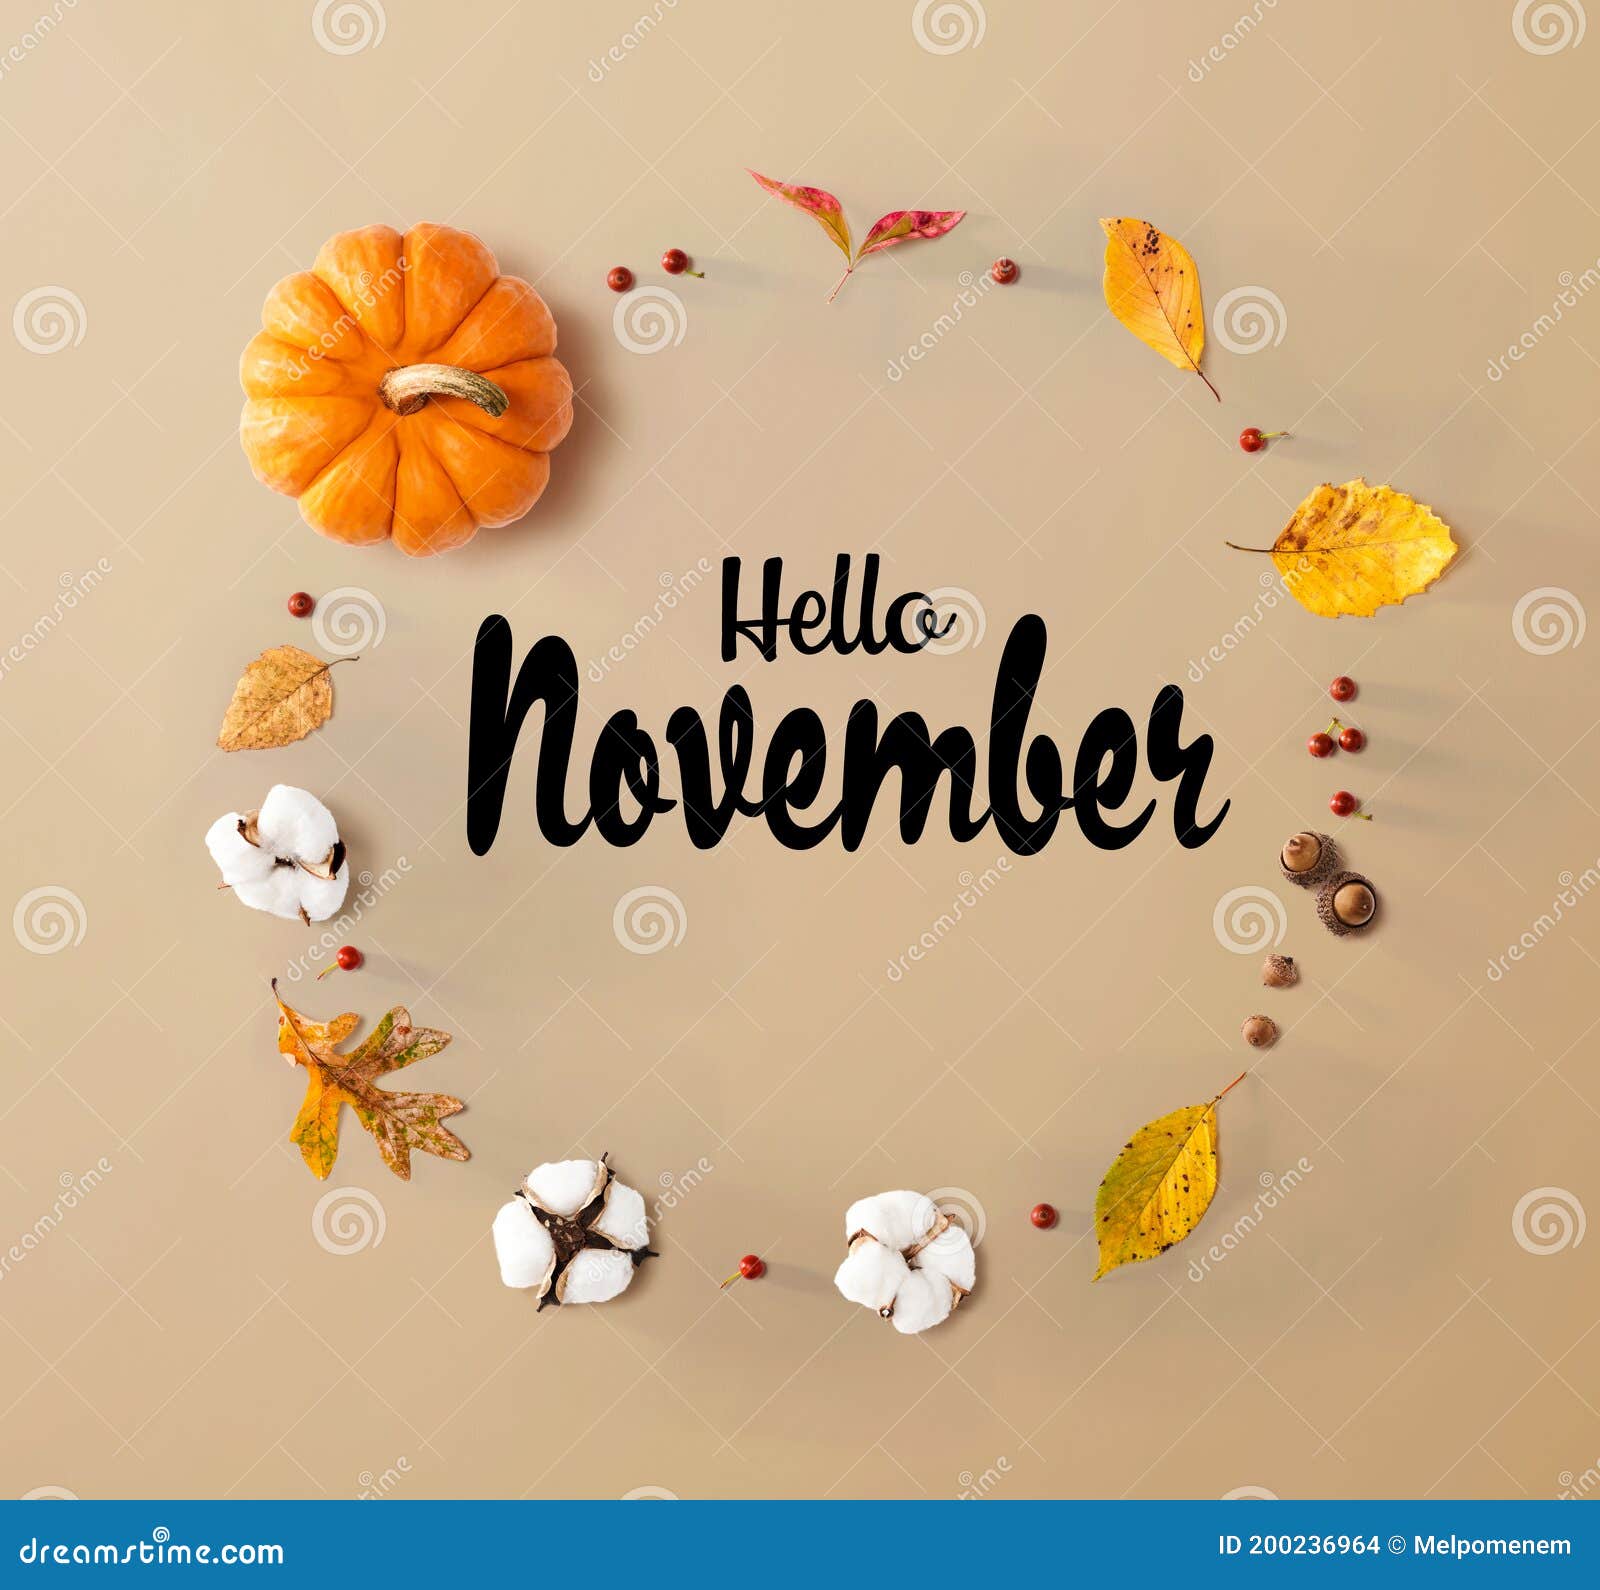 hello november message with autumn leaves and orange pumpkin